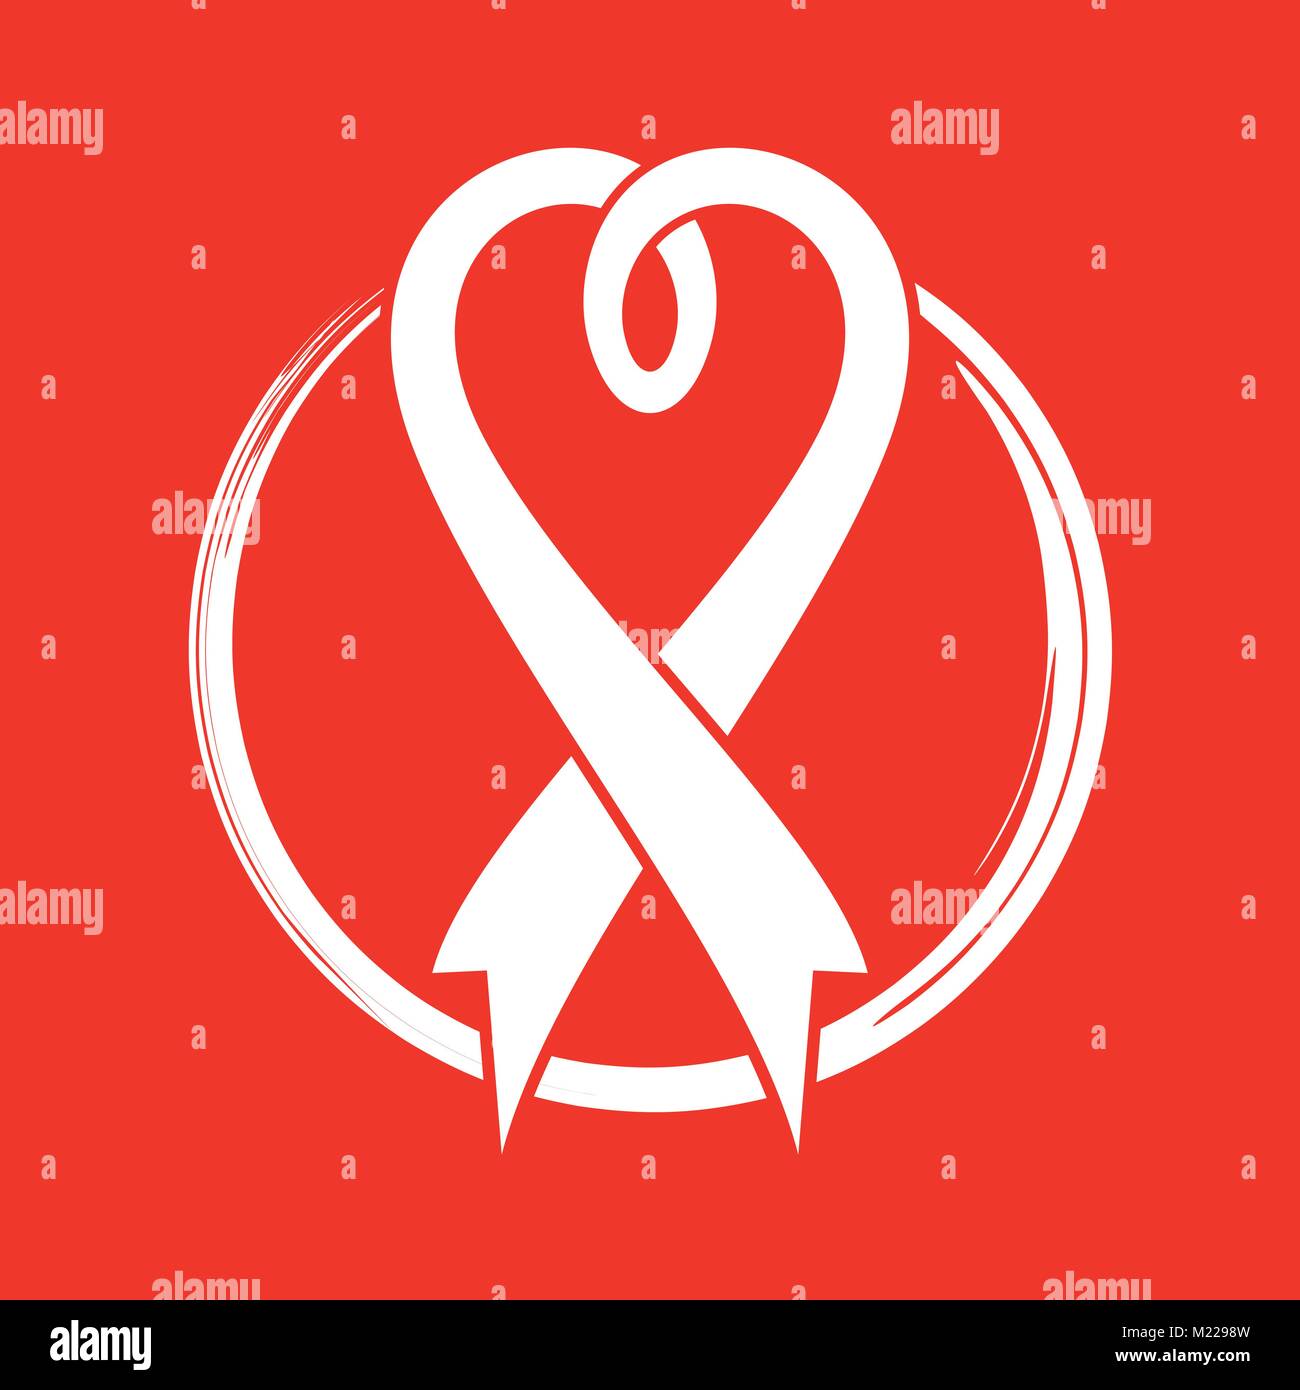 The Symbol Of The Fight Against Aids Is A Red Ribbon Light Beige Background  And Dark Circle Around Stock Illustration - Download Image Now - iStock